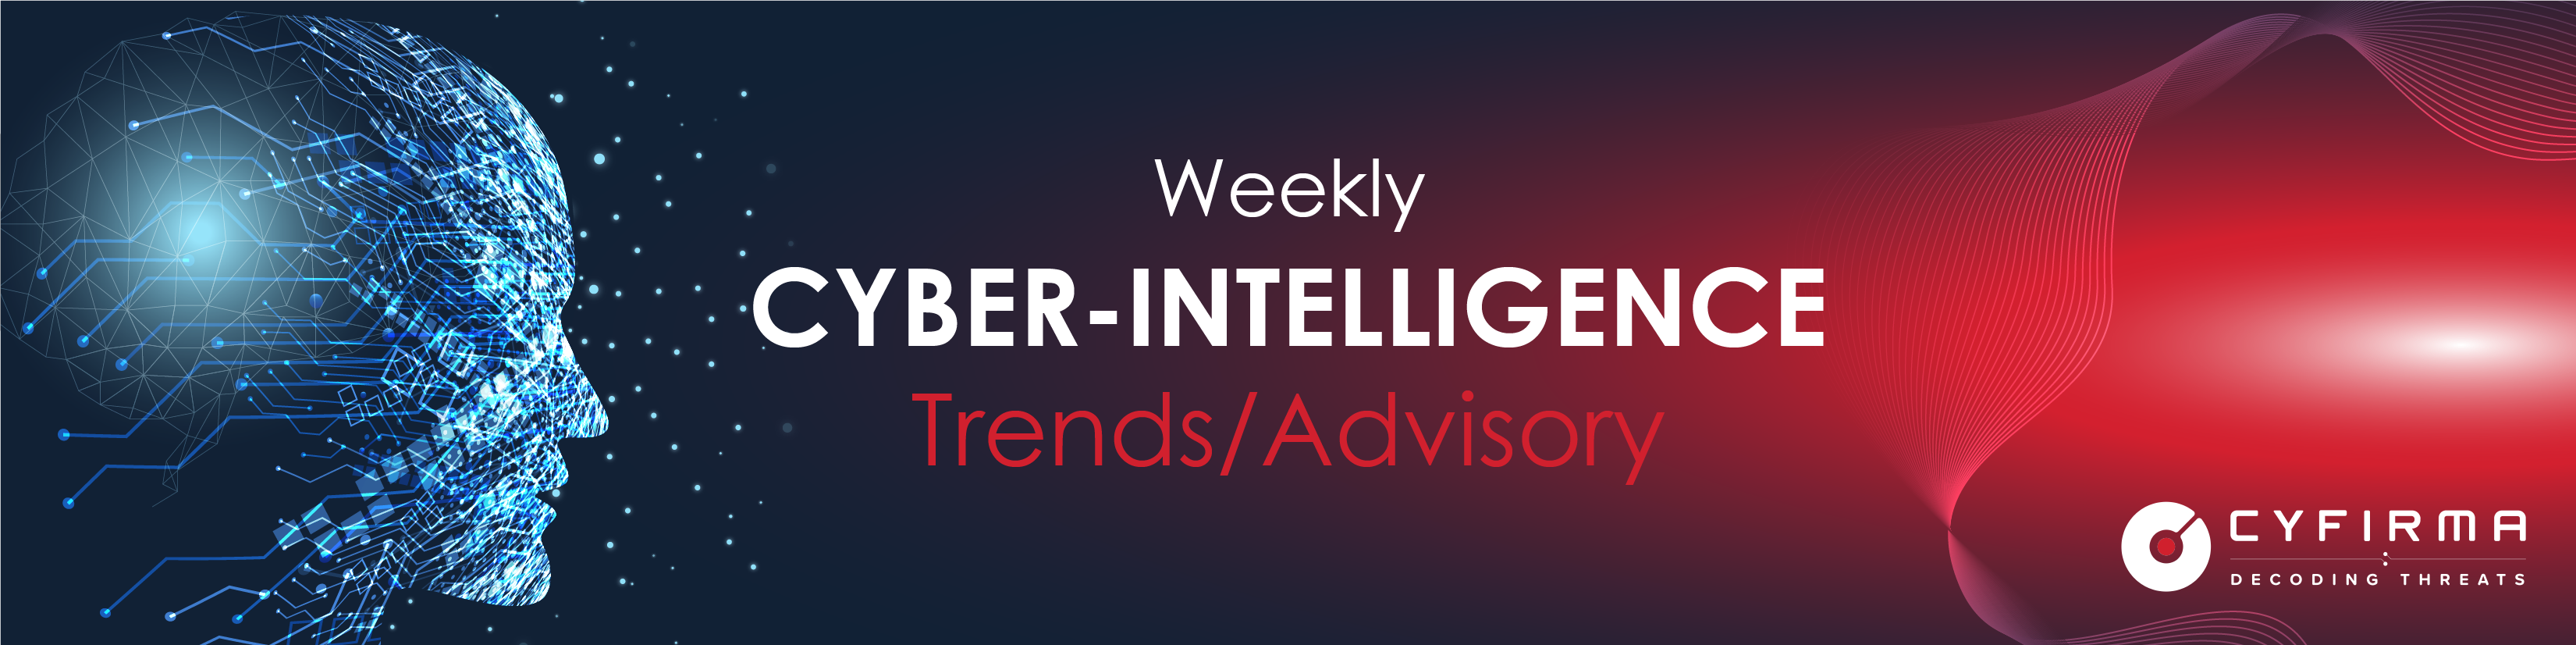 Weekly Intelligence Trends and Advisory | Threat Actor in Focus | Rise in Malware, Ransomware, Phishing | Vulnerability and Exploits – 24 Dec 2021